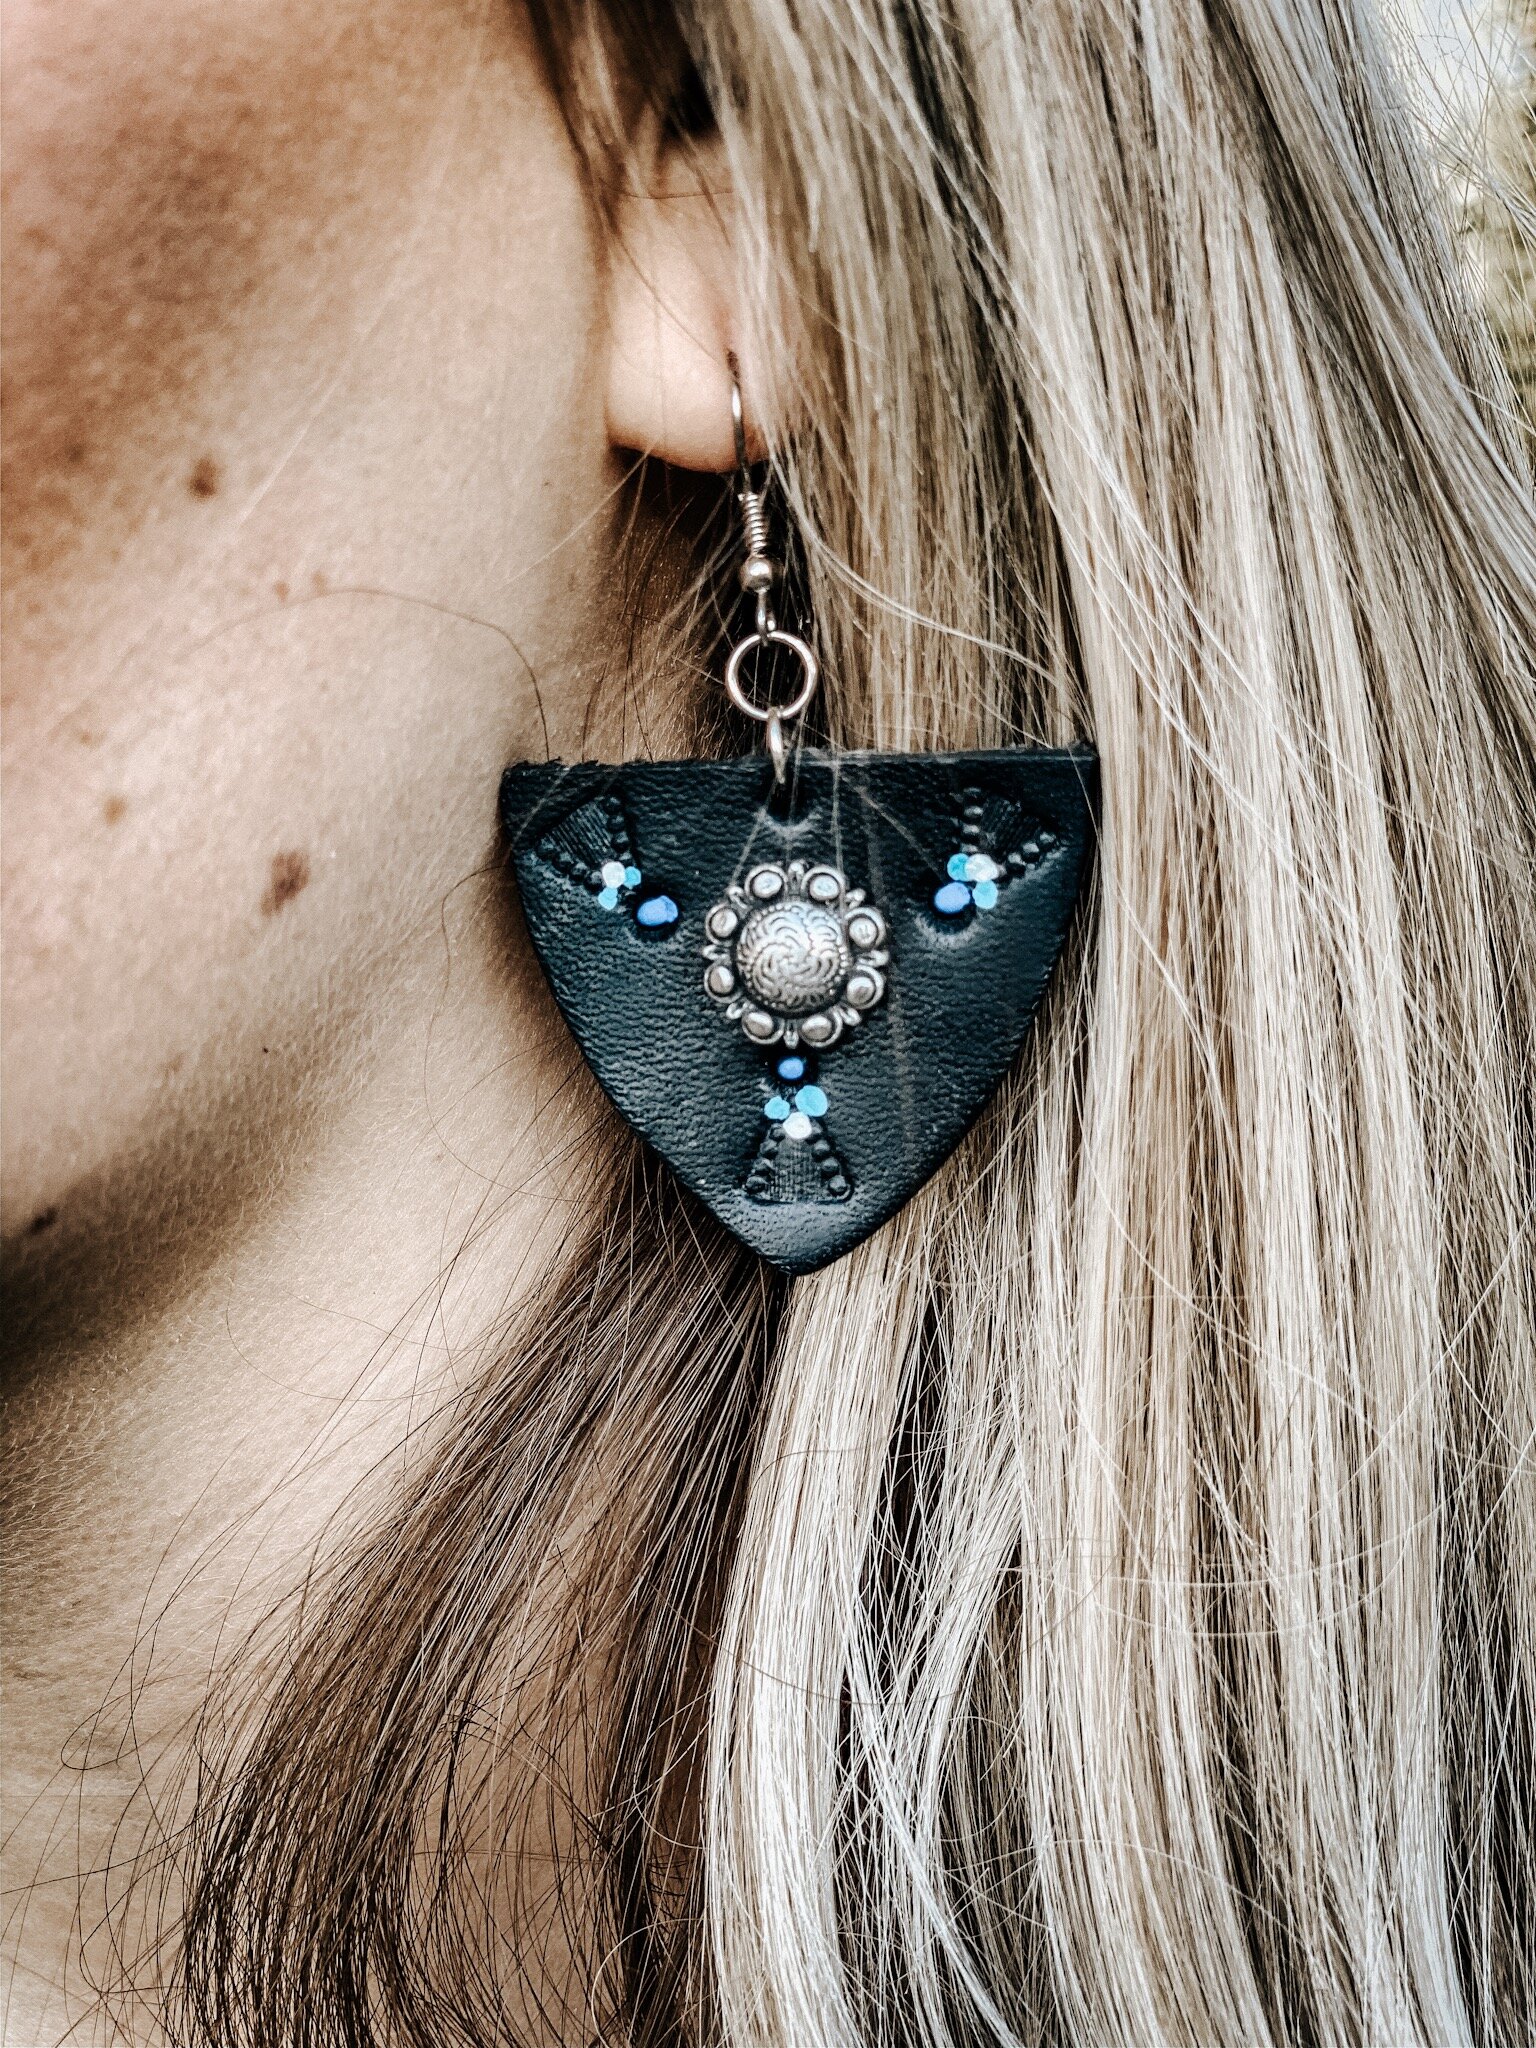 Midnight Black Mini Sparkles  Leather Earrings  Glam by Sam Whiting